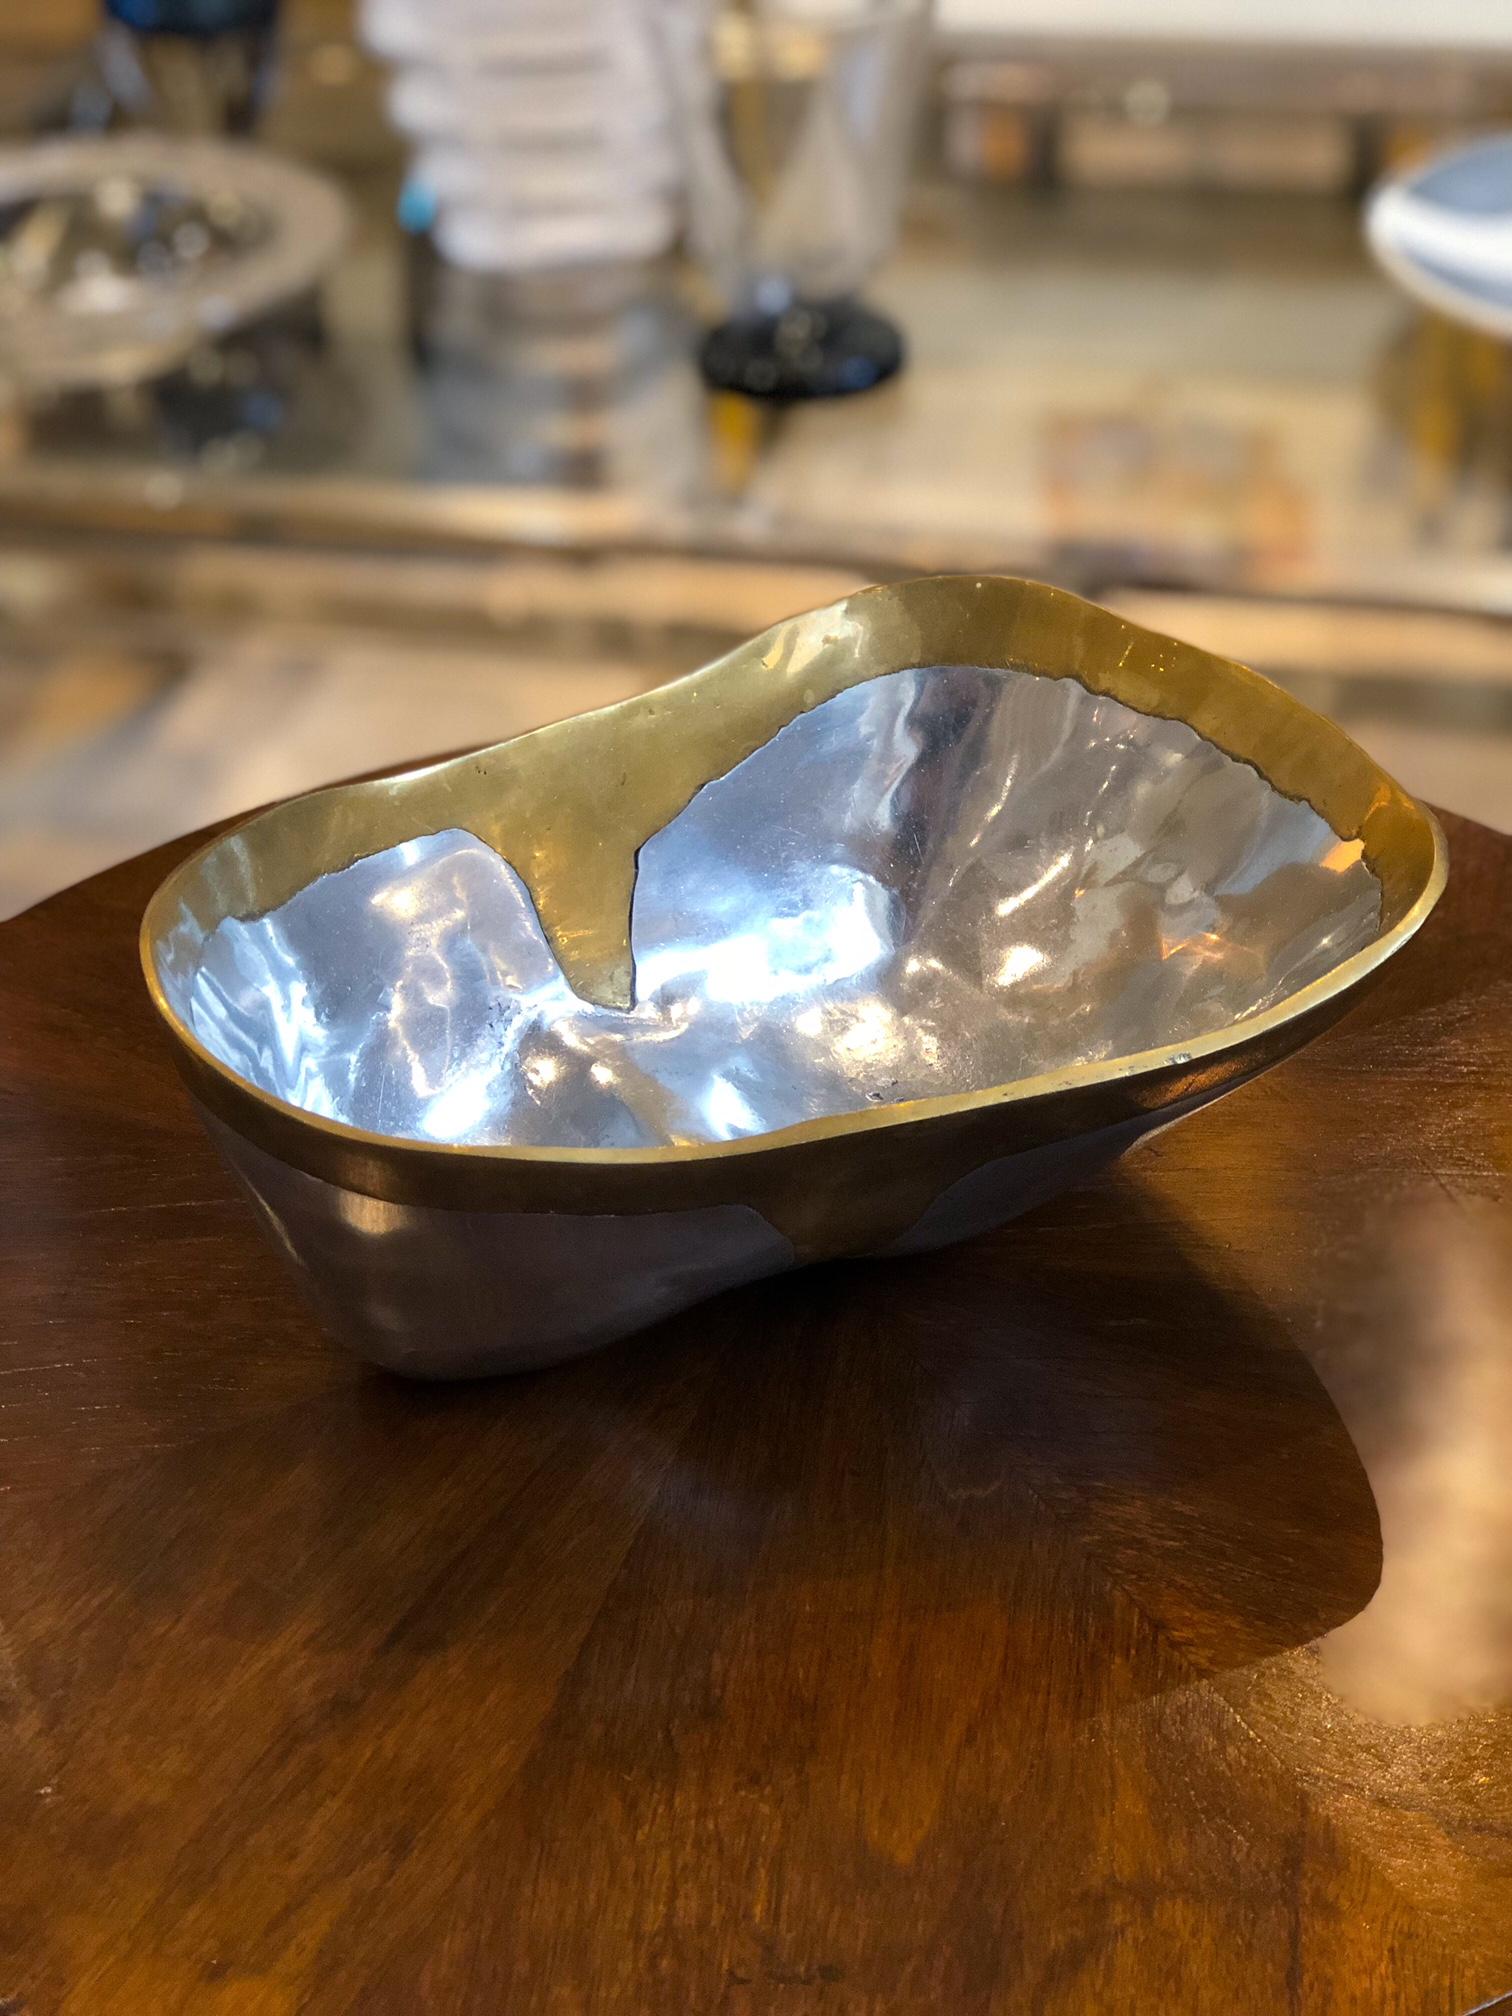 Hand crafted sand cast aluminium and brass bowl by David Marshall. Seville, Spain circa 1970-80.

Size: 10” W x 7” D x 4” H

Aluminium and brass brutalist style tray by David Marshall, circa 1970s. This tray is different than many of Marshall's